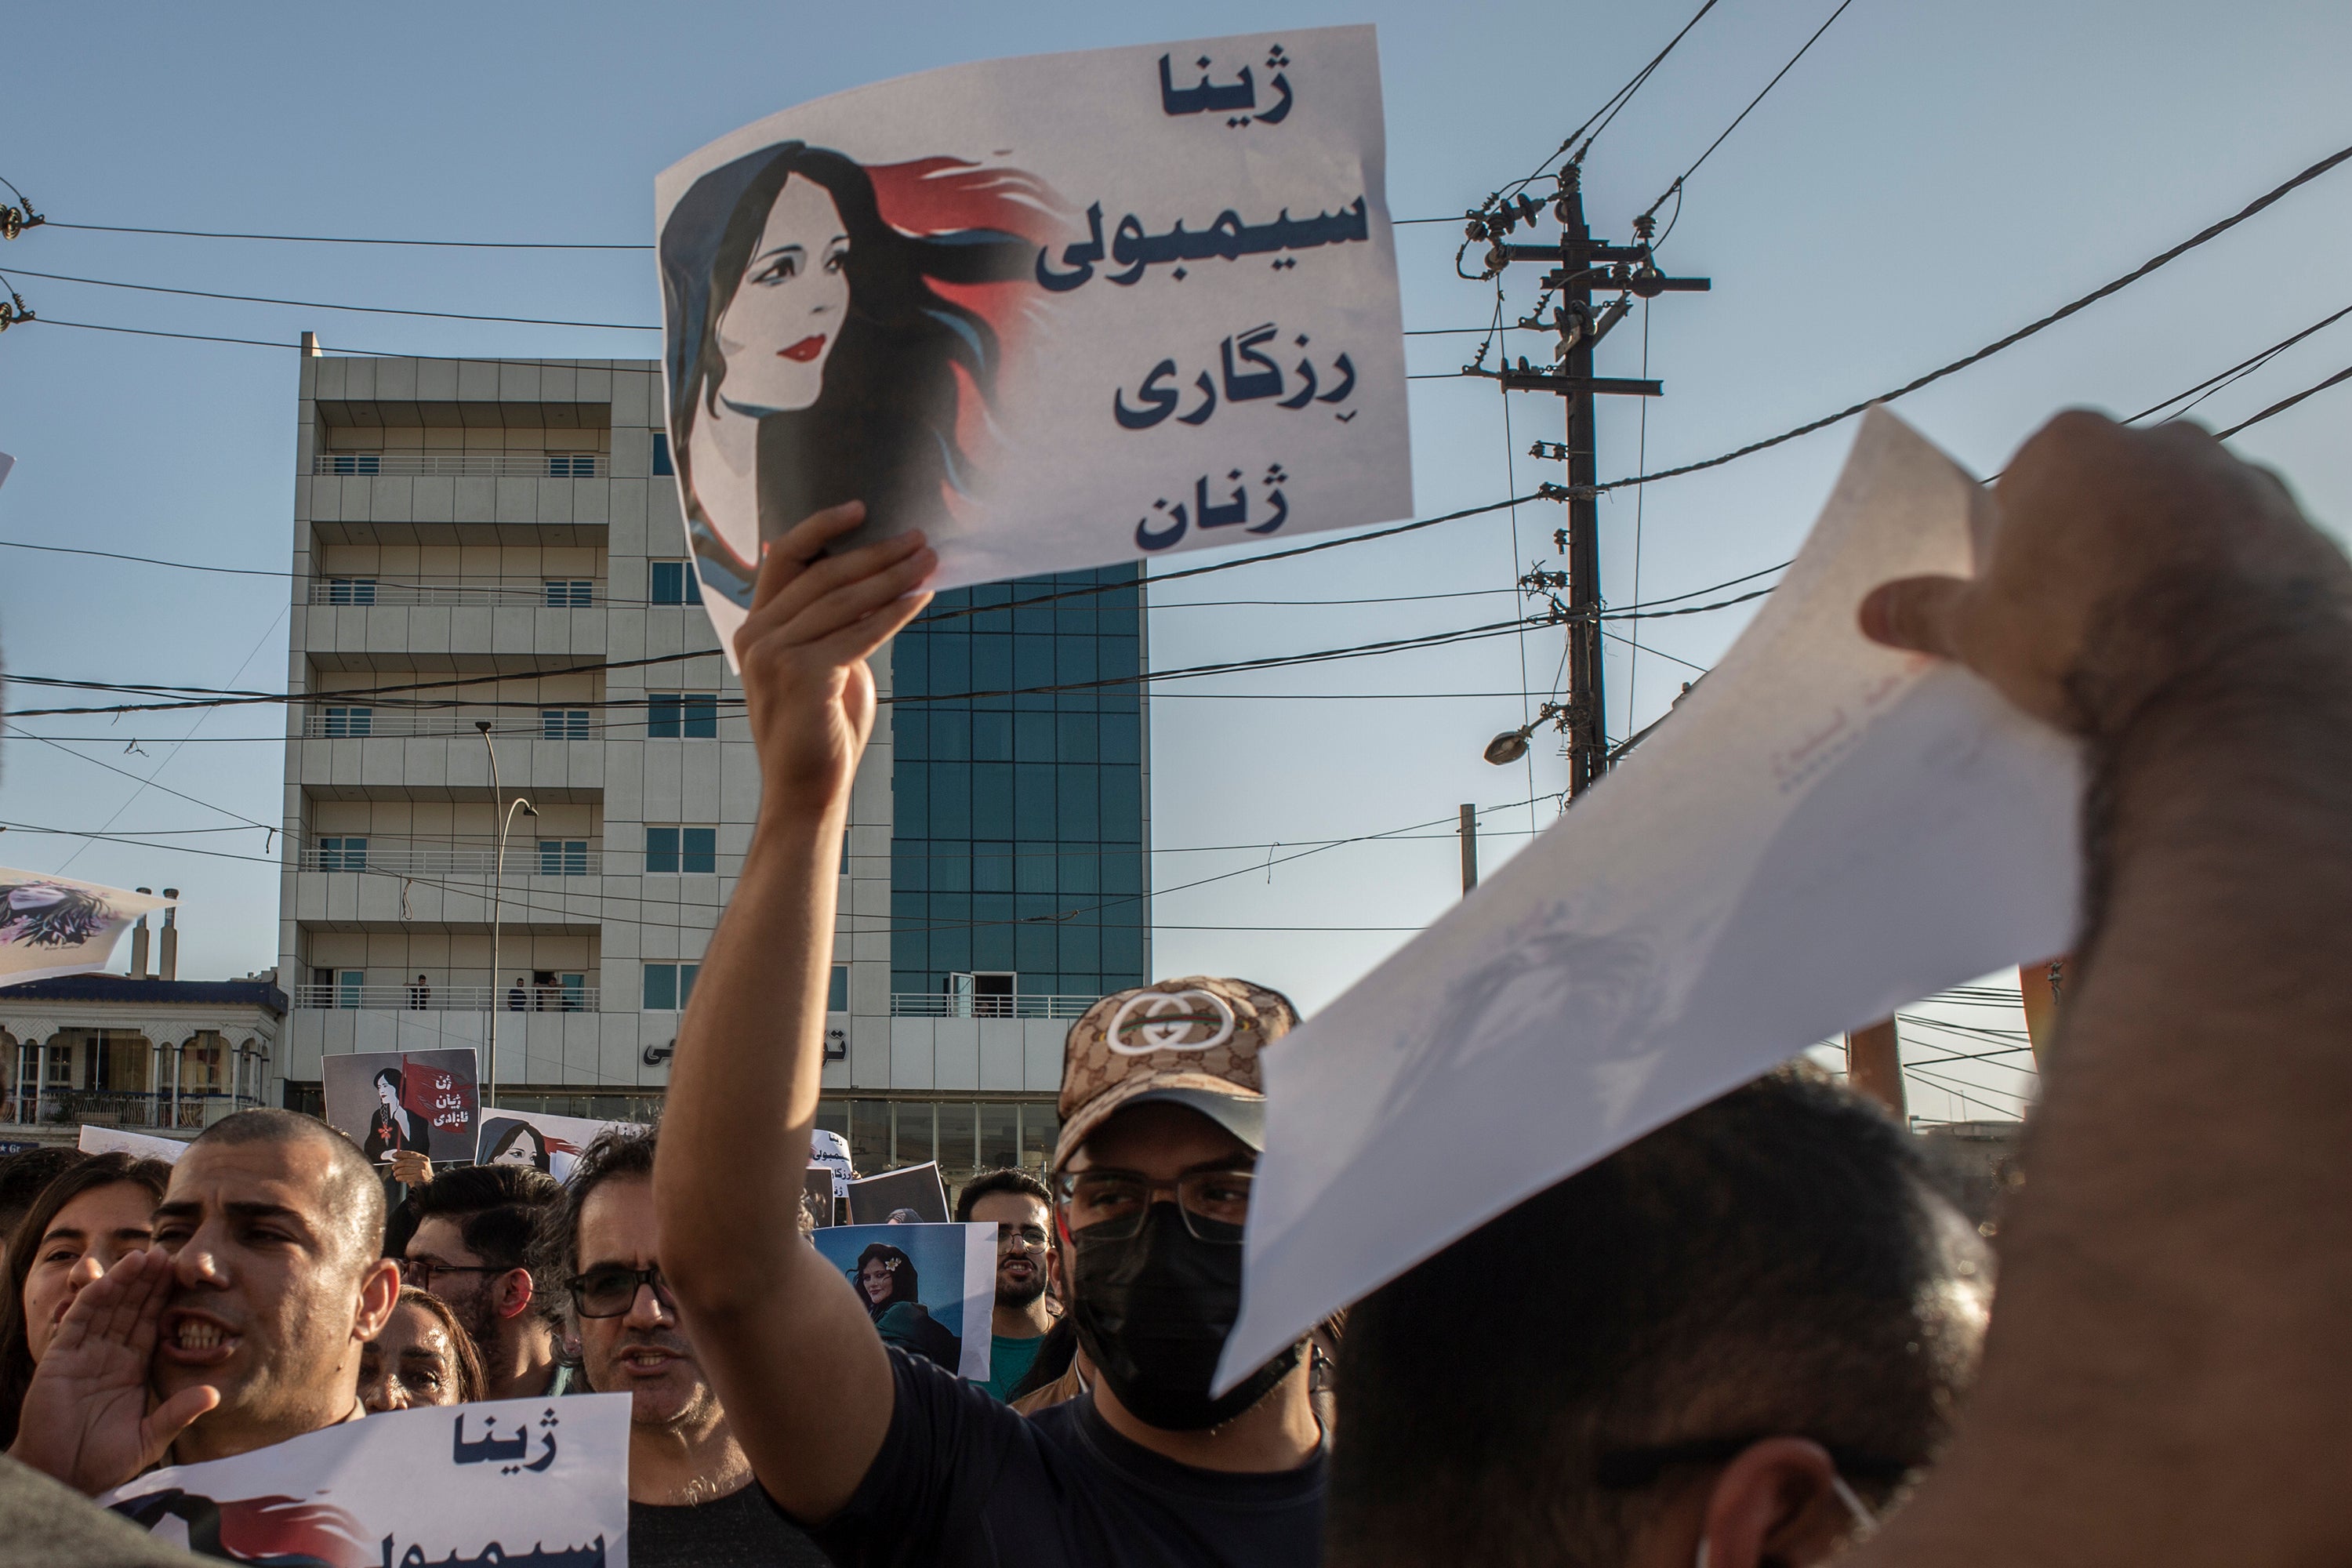 Protesters gather in Sulaymaniyah on 28 September to protest the killing of Mahsa Amini